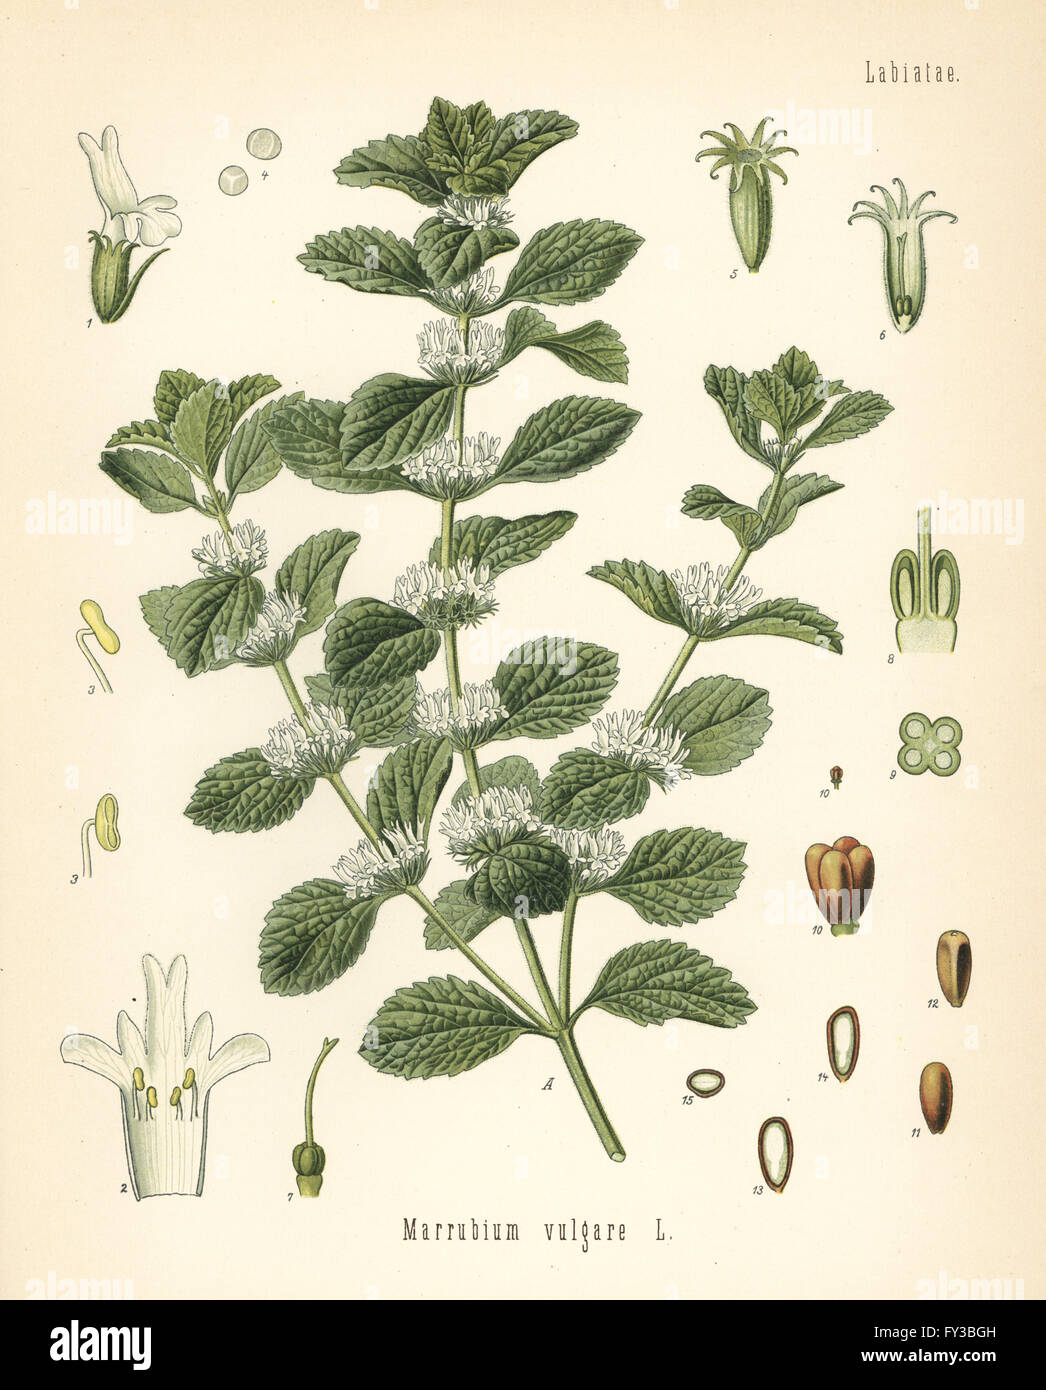 Common horehound, Marrubium vulgare. Chromolithograph after a botanical illustration from Hermann Adolph Koehler's Medicinal Plants, edited by Gustav Pabst, Koehler, Germany, 1887. Stock Photo